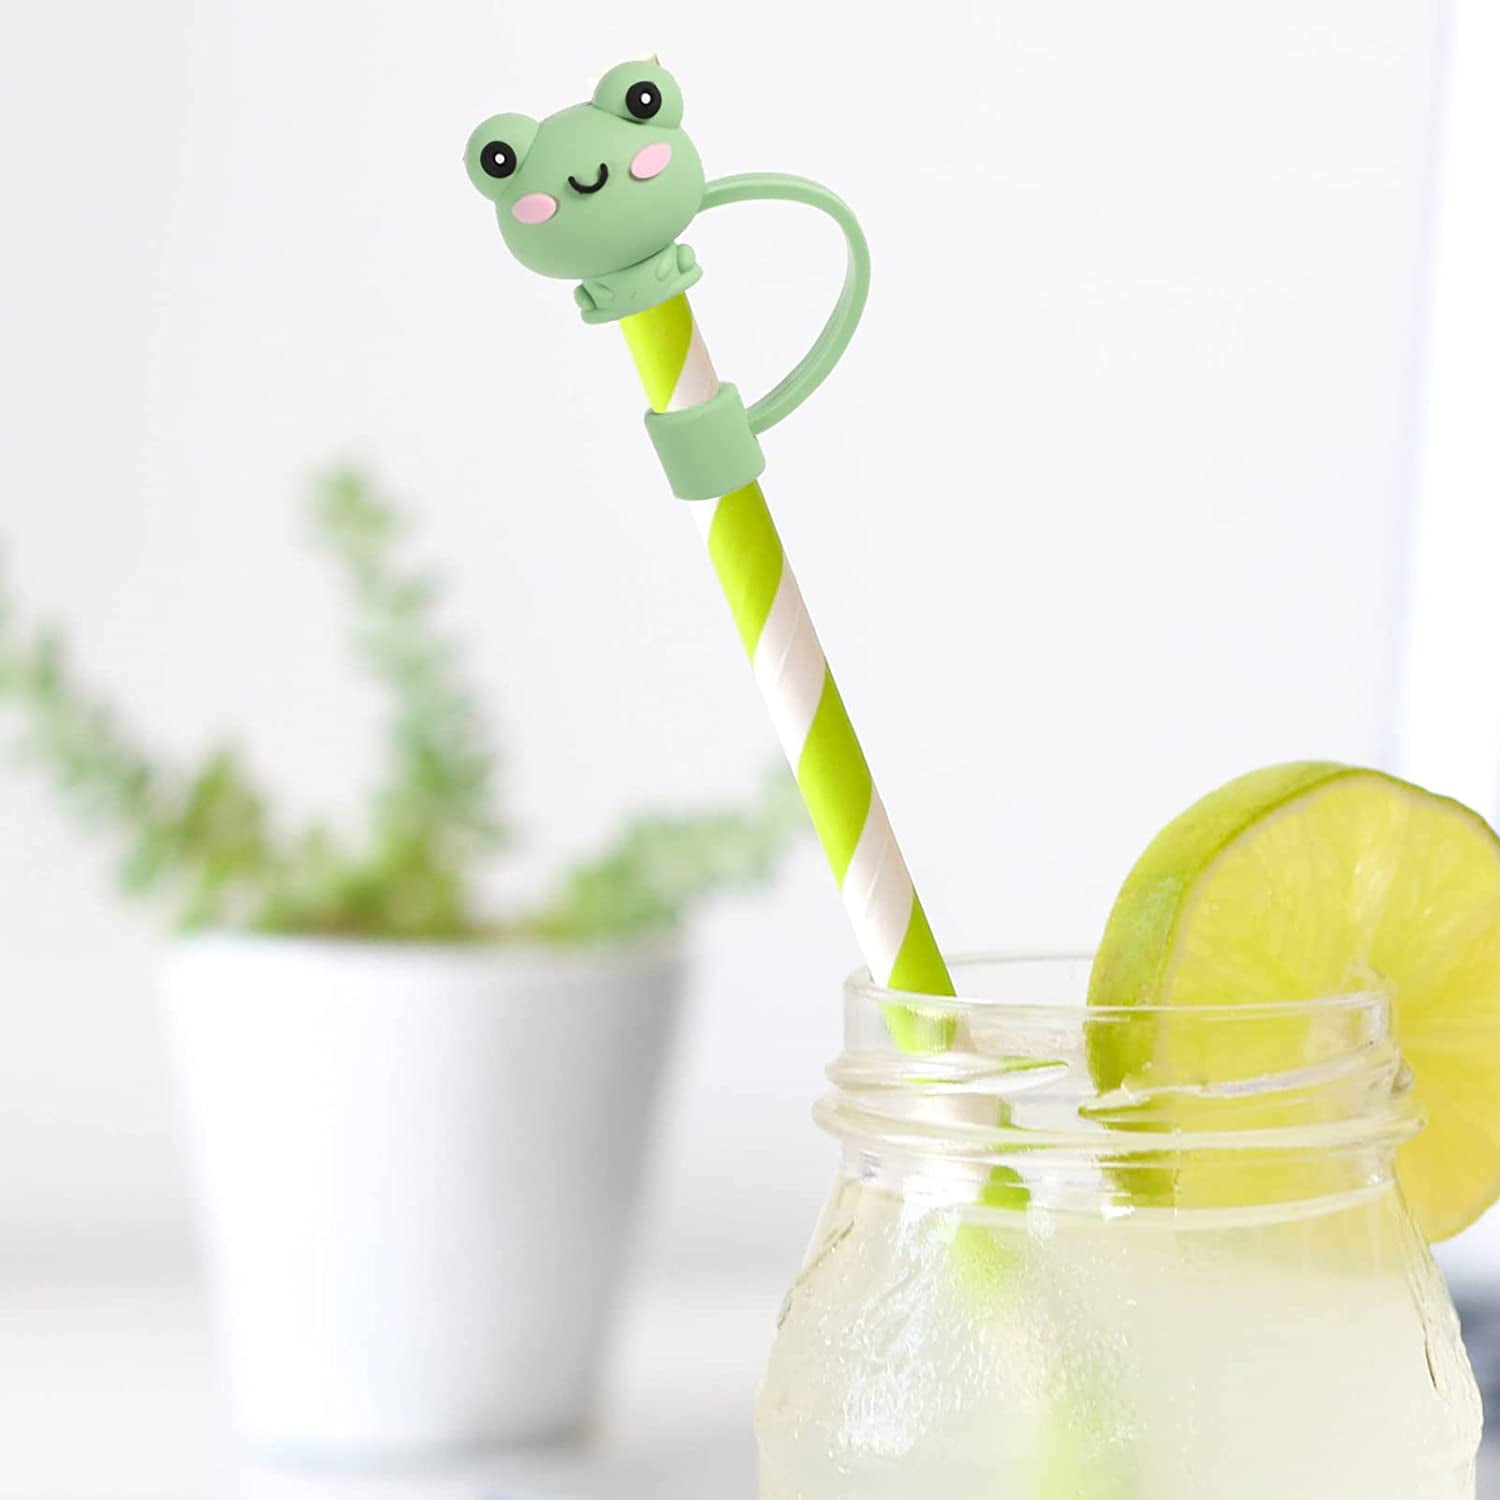 Cheers.US 4 Pcs/Set Glass Straws - Reusable Drinking Straws with Cute Fish, Glass Drinking Straws Cartoon Animal Straws - Dishwasher Safe -  Eco-Friendly - Supplies Party Favors for Kids 